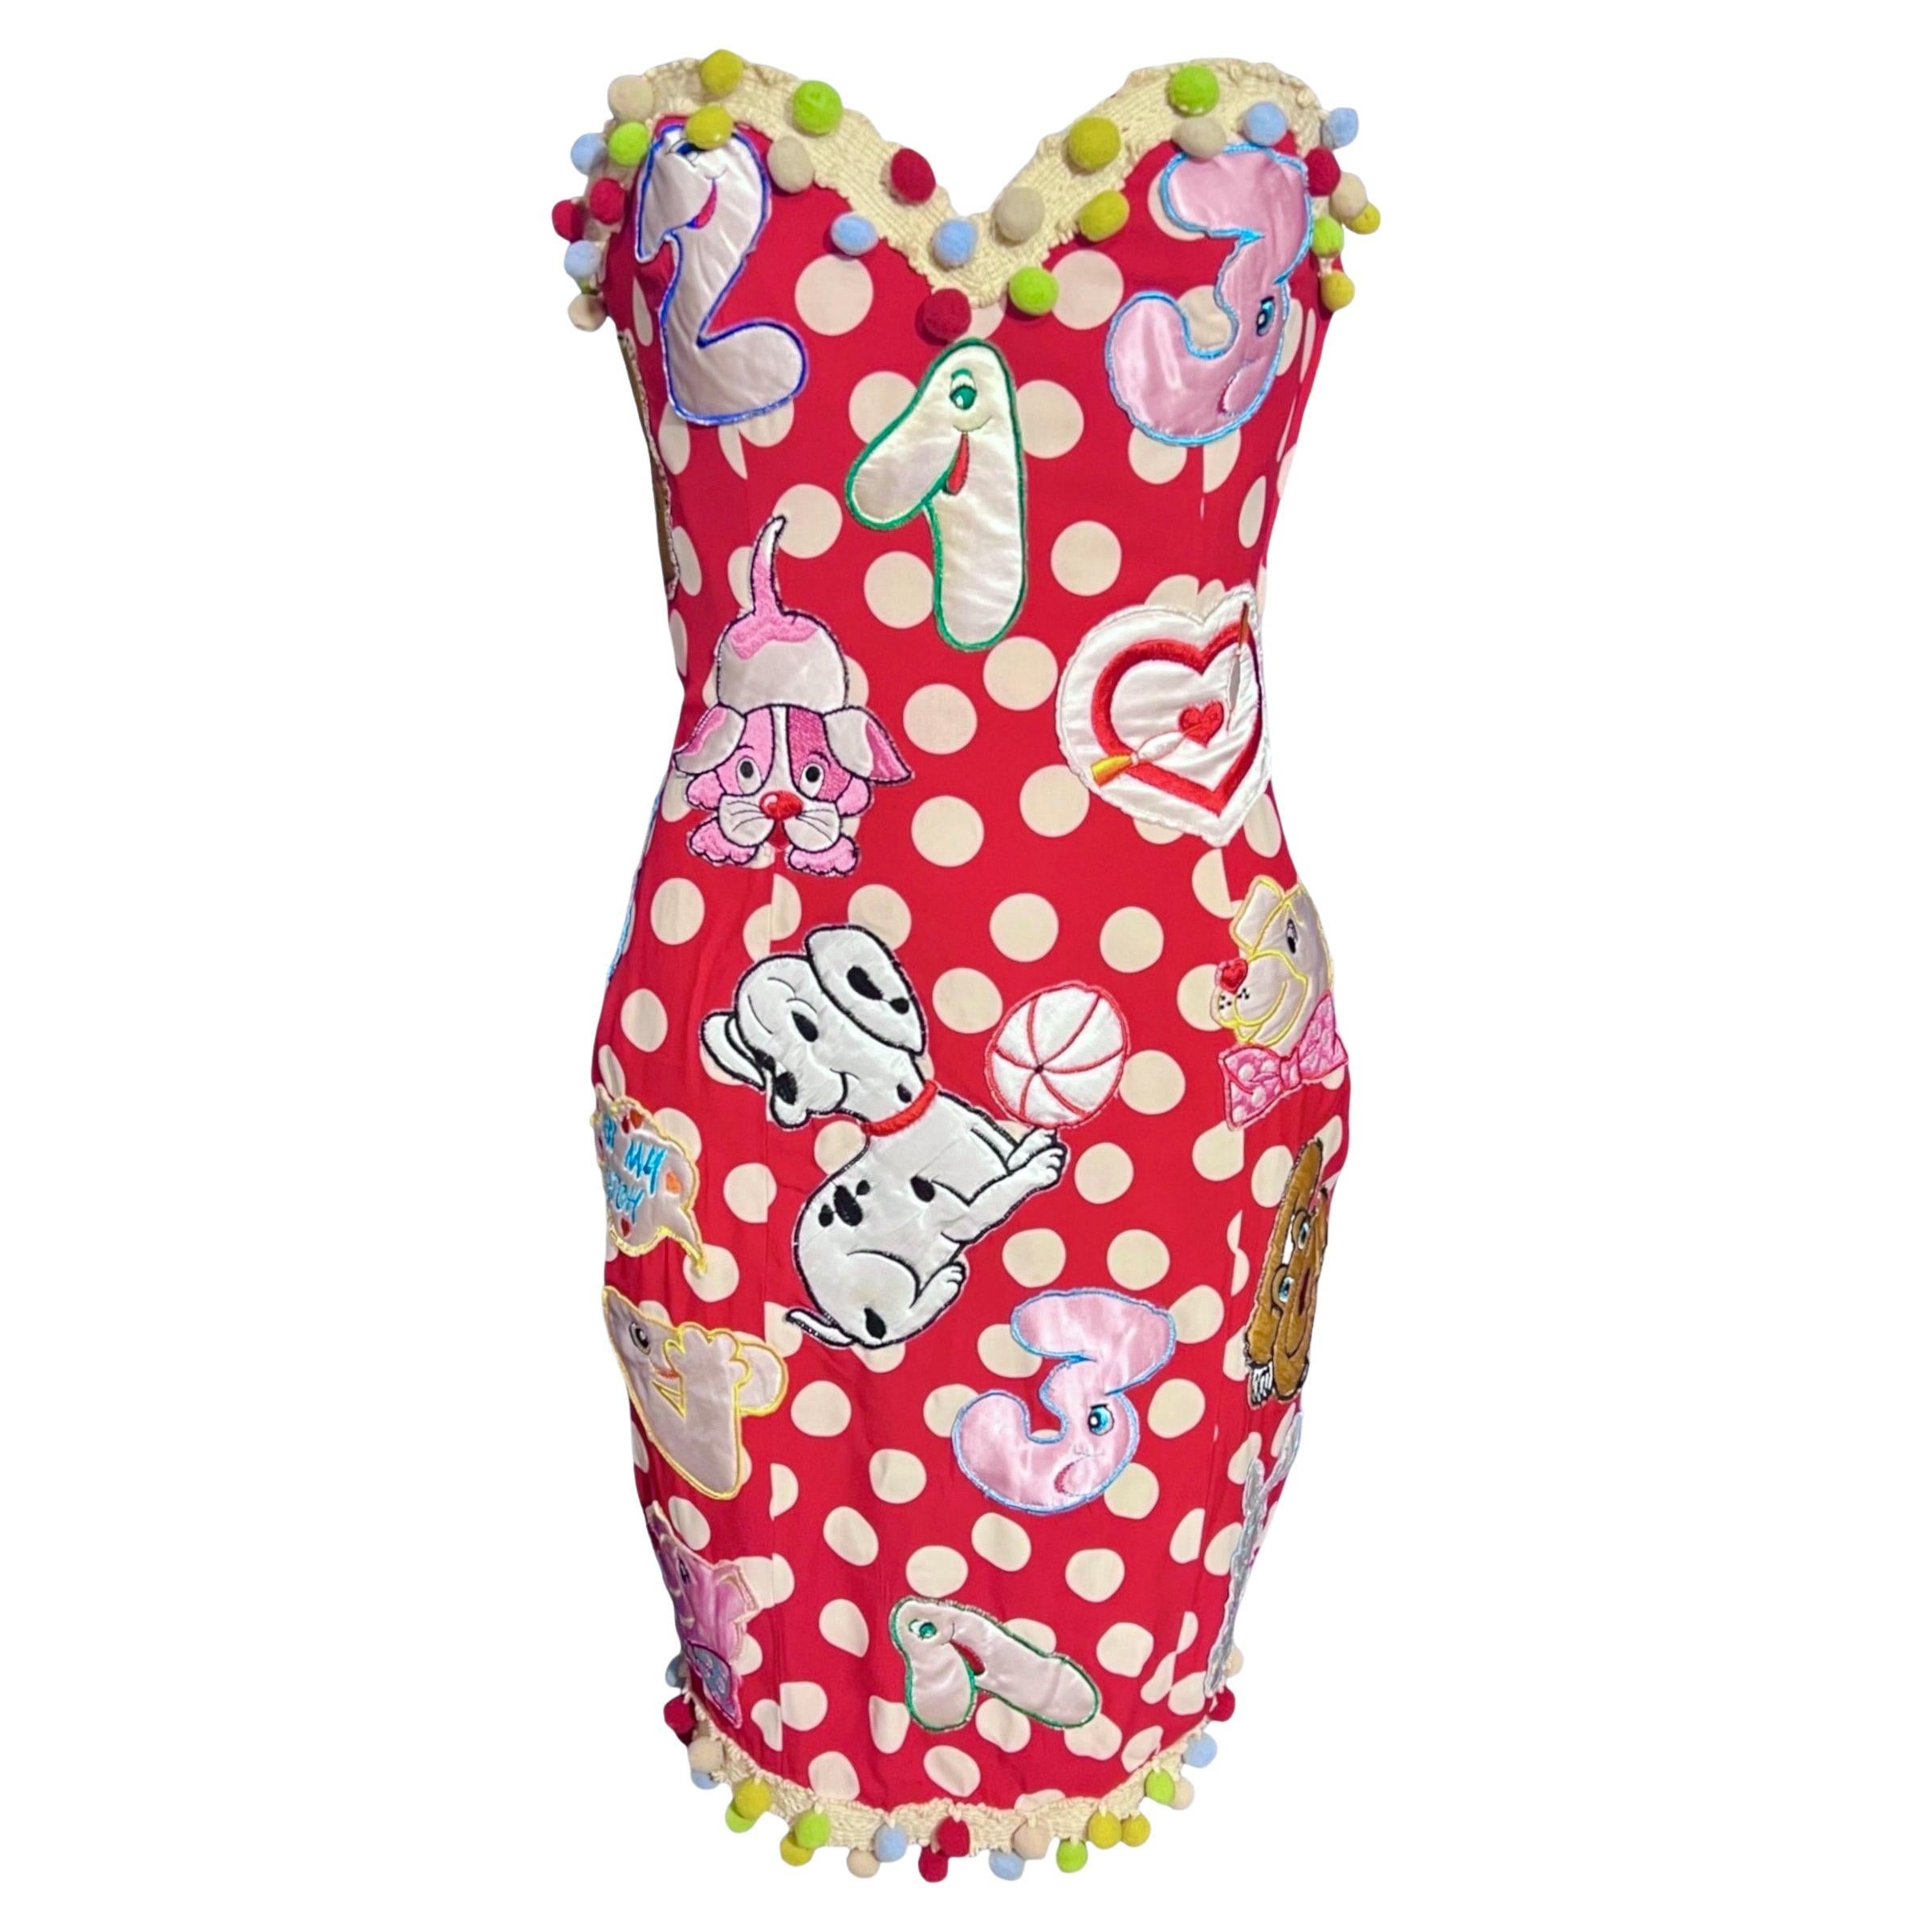 1988 Moschino "Kiss My Patch" Embroidered Strapless Polka Dot Dress For Sale